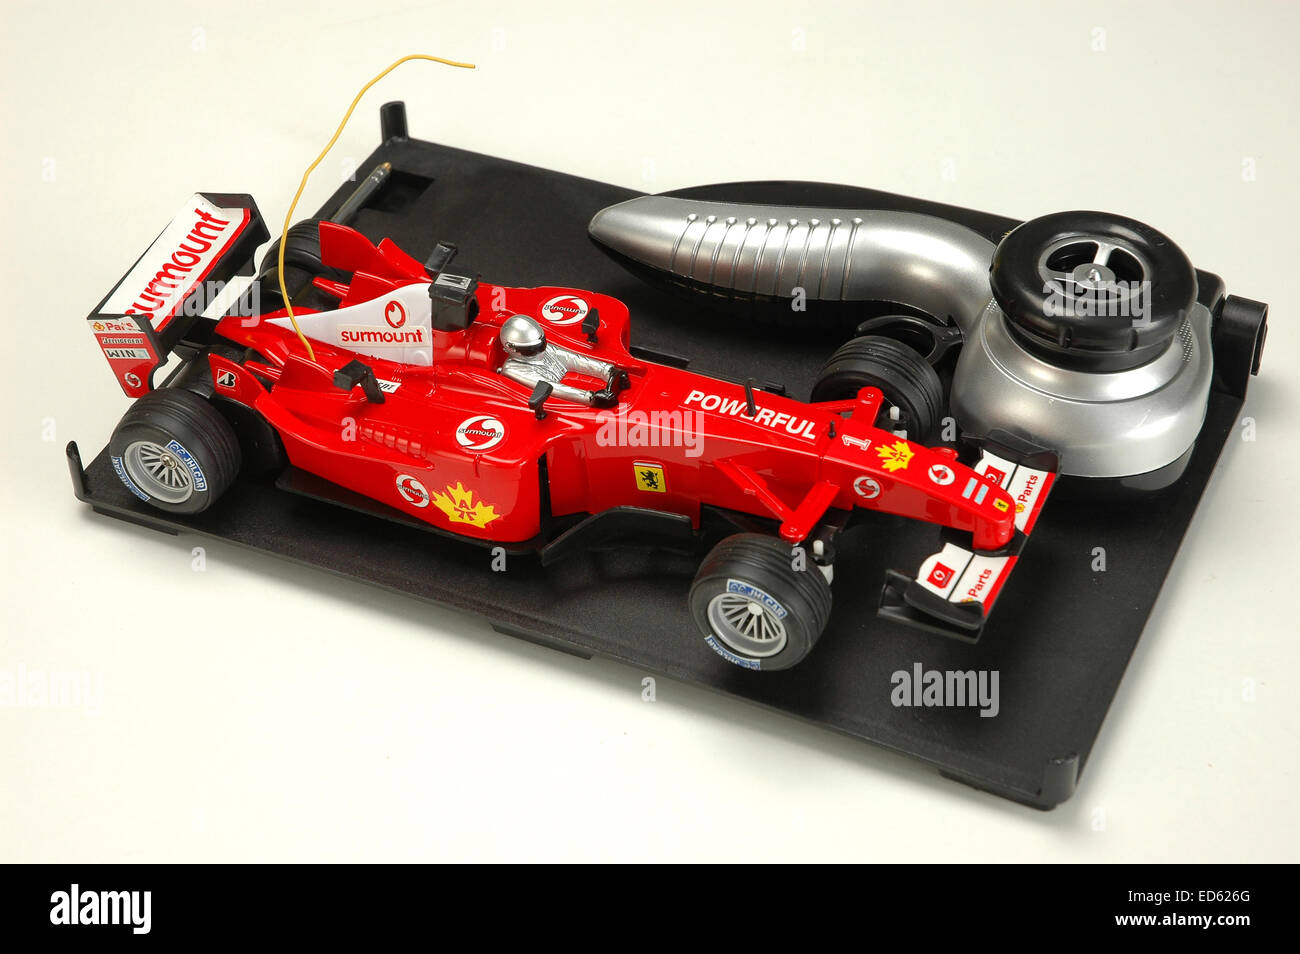 Toy Formula 1 racing car with remote control Stock Photo - Alamy